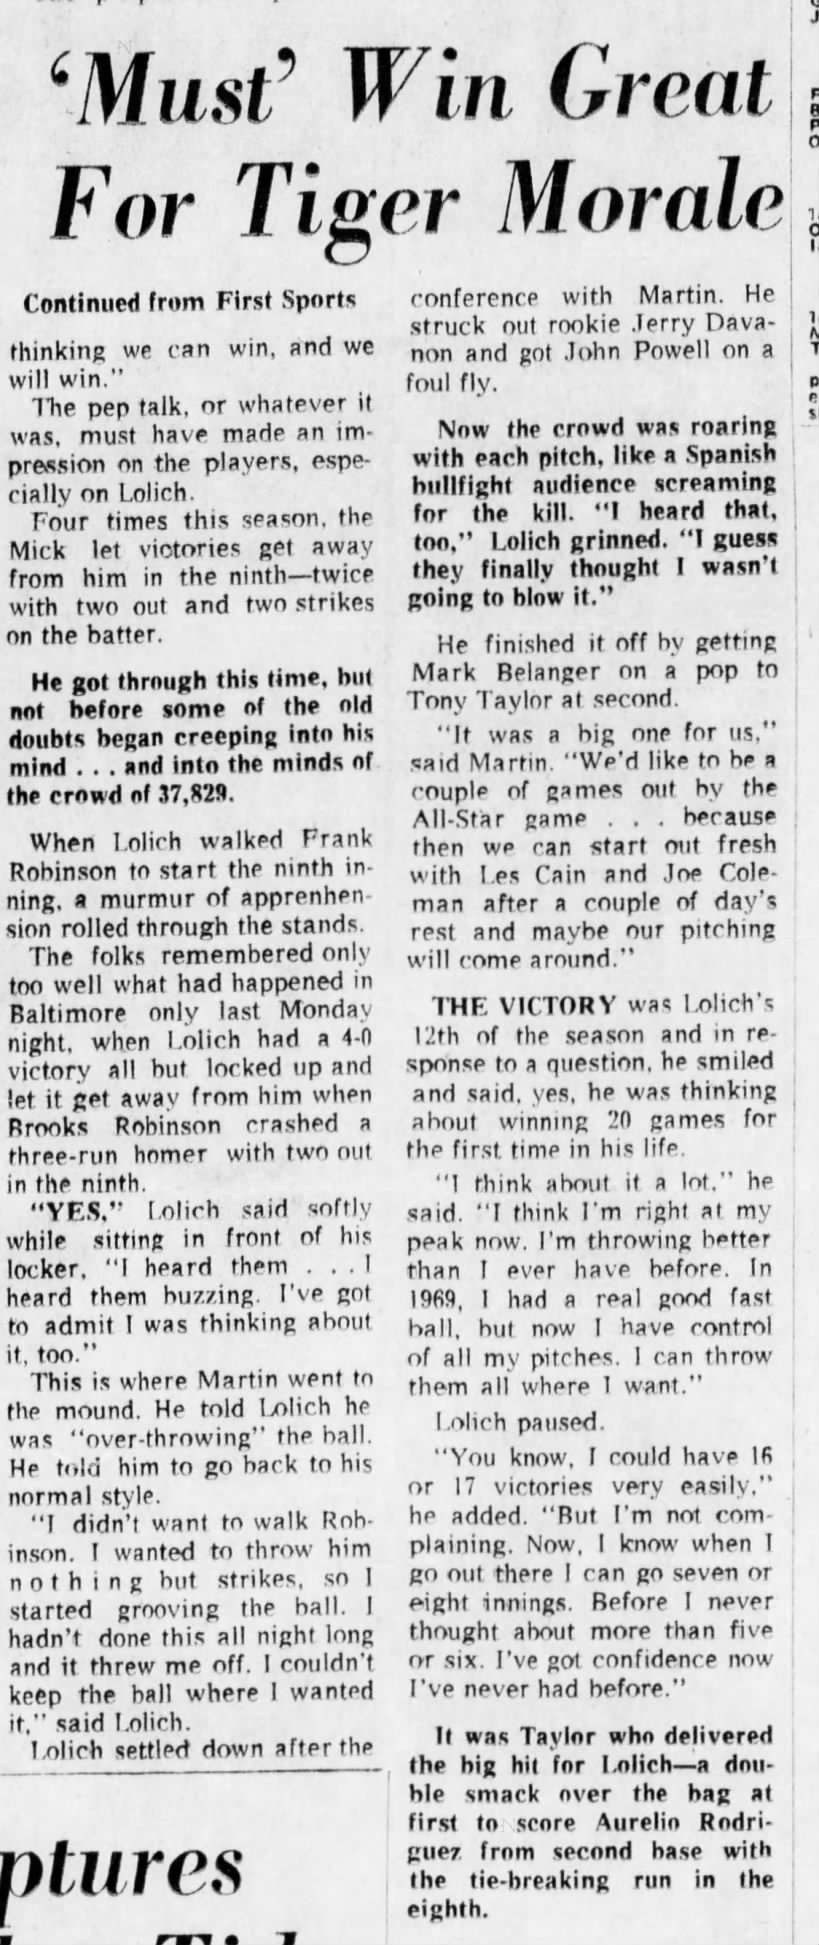 Sat 7/3/71: Lolich after win vs BAL